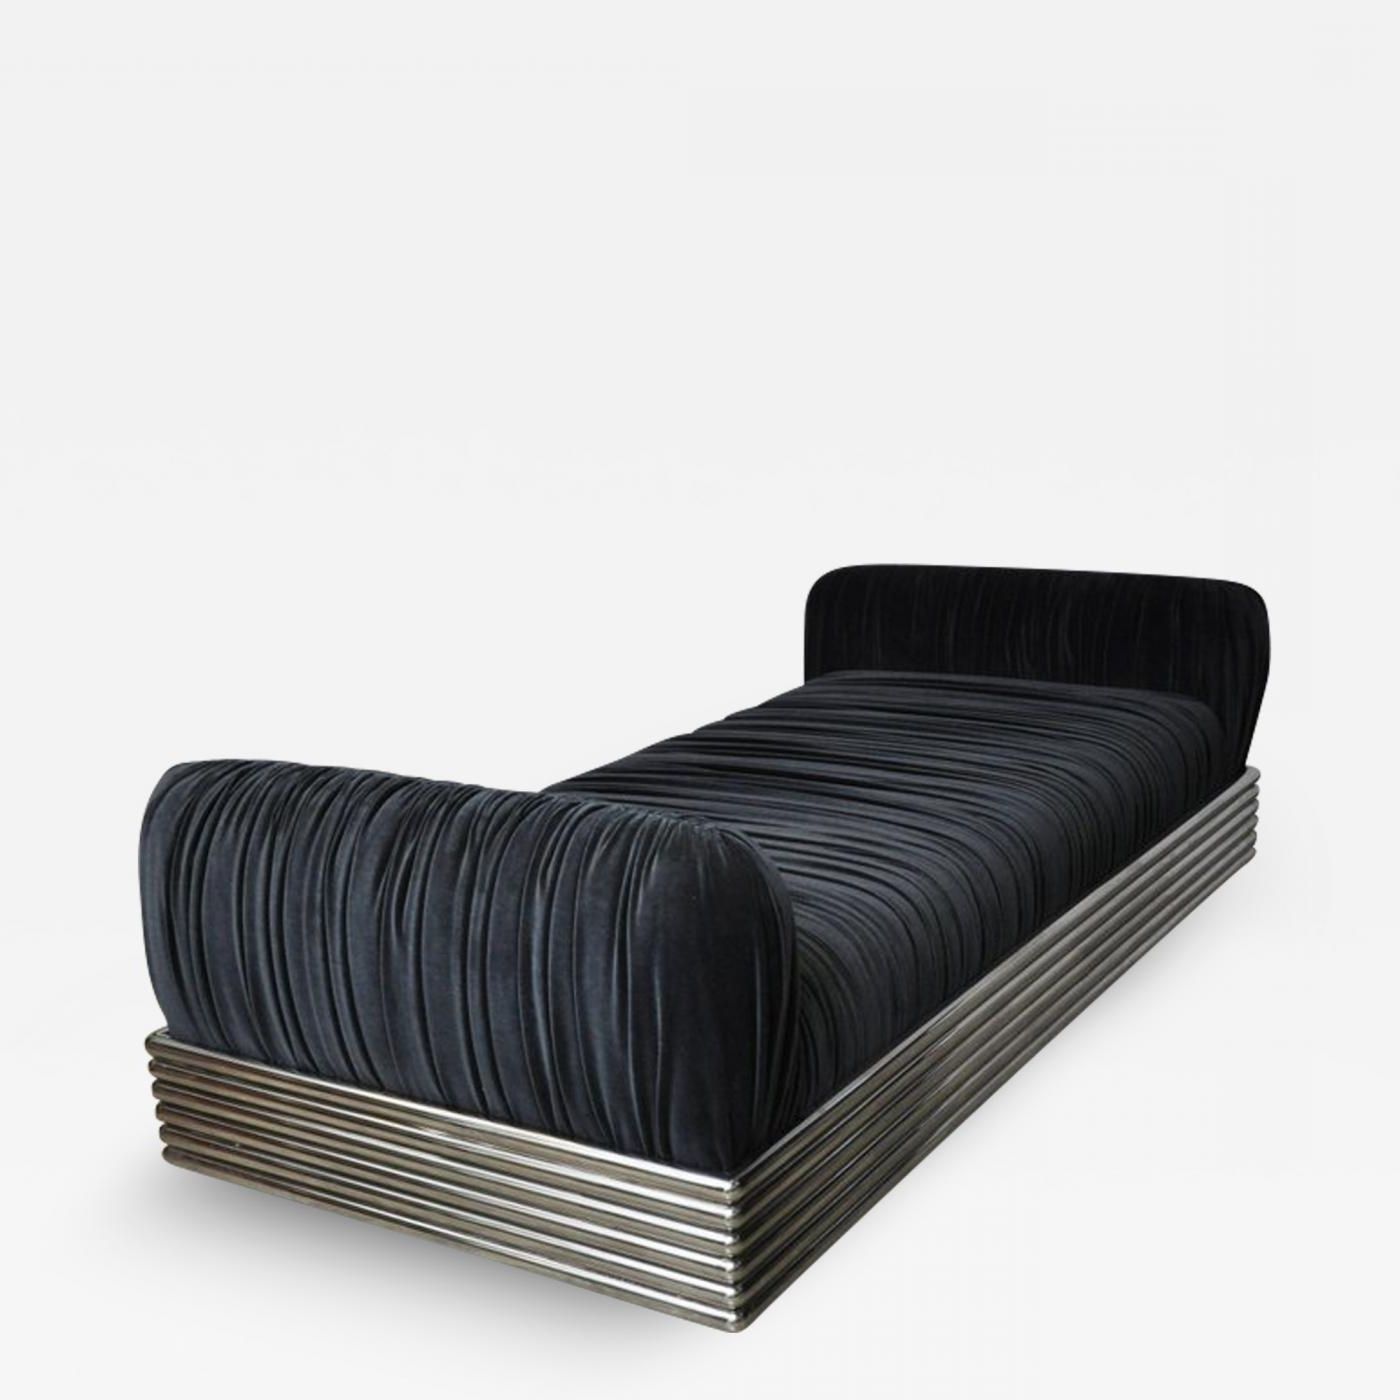 Brueton – Brueton Radiator Chaise Longue Daybed With Best And Newest Chaise Lounge Daybeds (View 10 of 15)